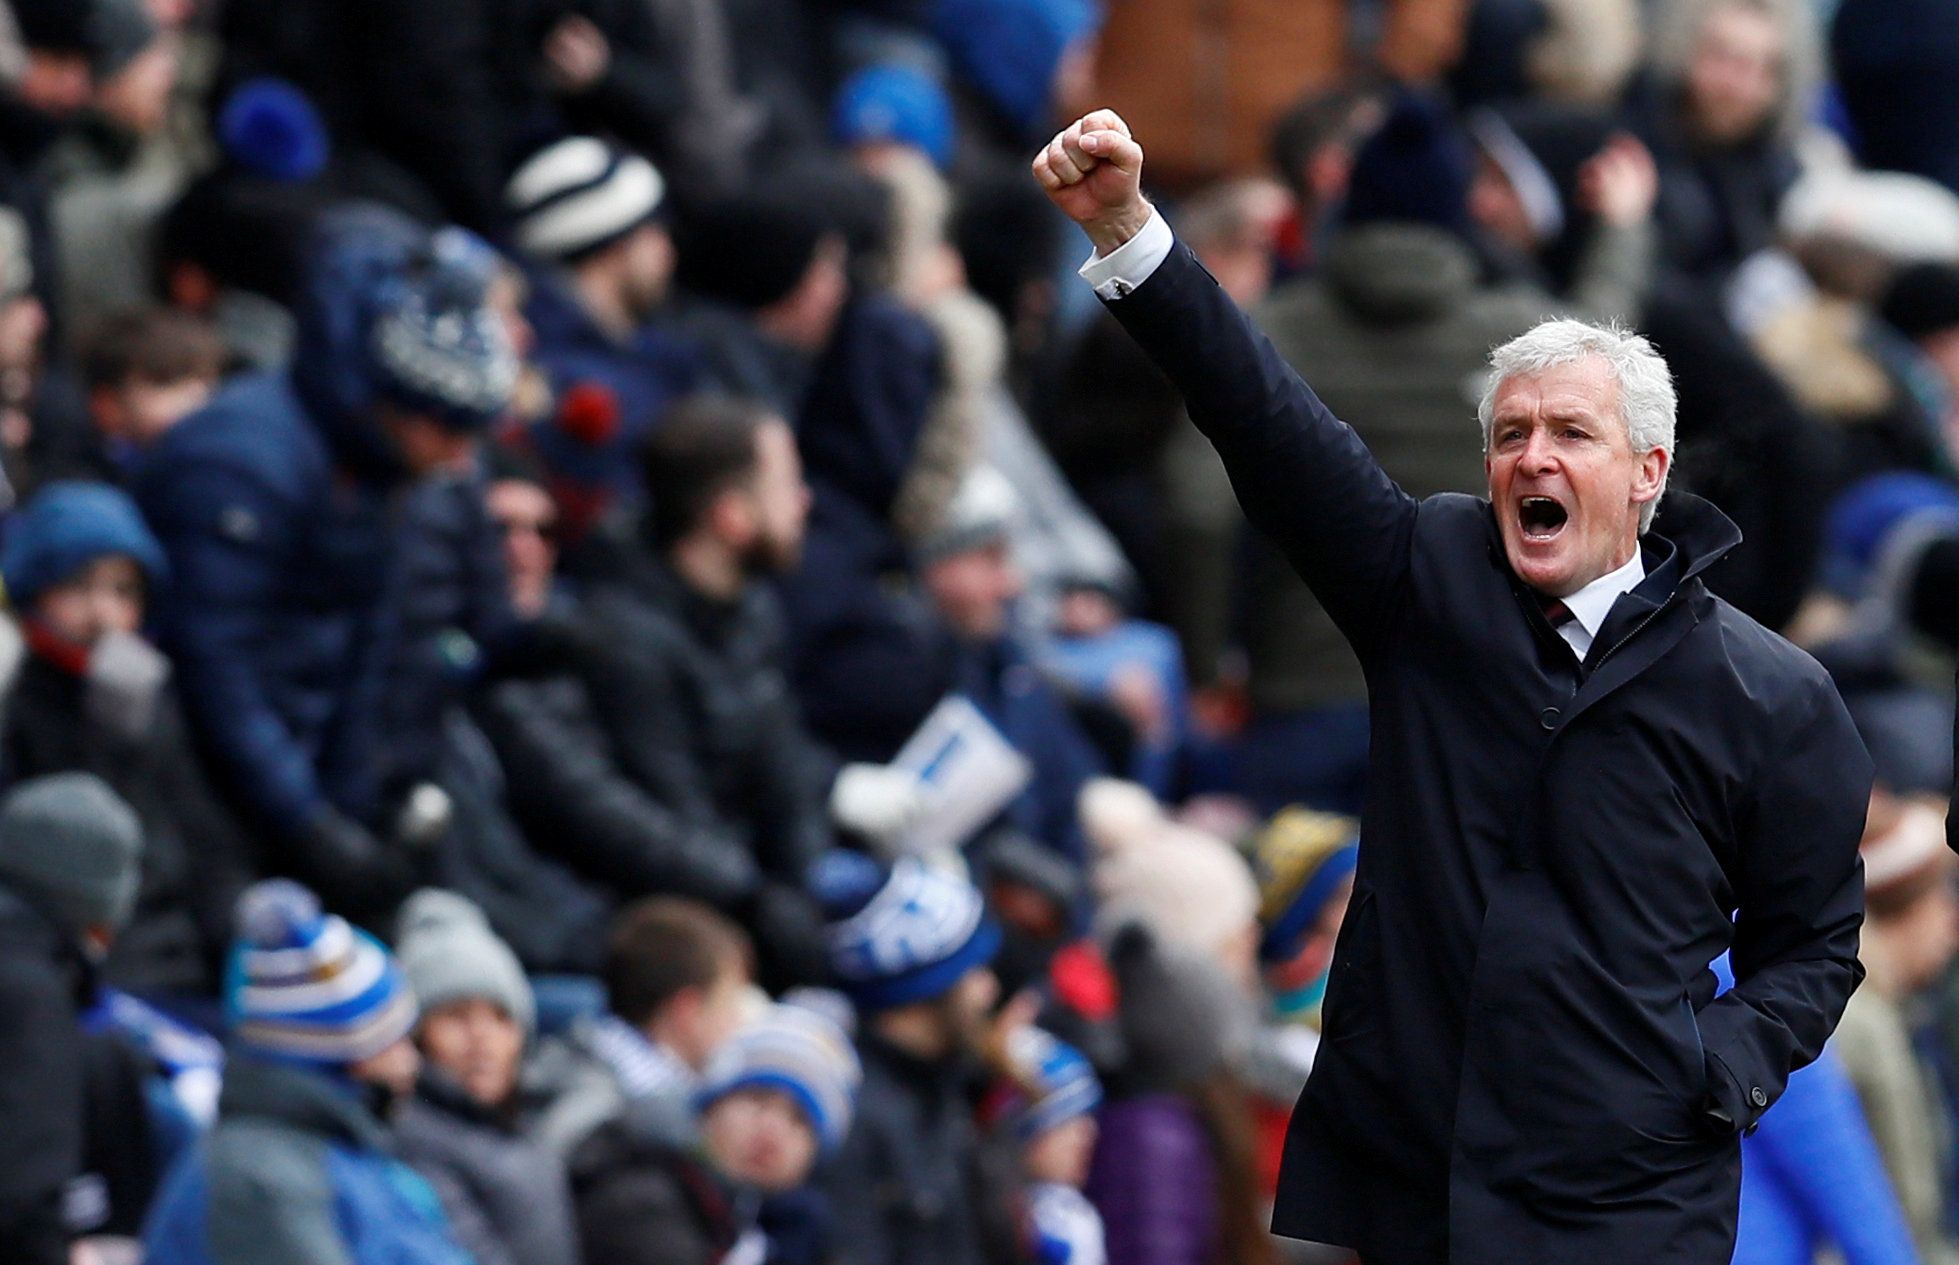 Soccer Football - FA Cup Quarter Final - Wigan Athletic vs Southampton - DW Stadium, Wigan, Britain - March 18, 2018   Southampton manager Mark Hughes celebrates after Cedric Soares scores their second goal    Action Images via Reuters/Jason Cairnduff     TPX IMAGES OF THE DAY